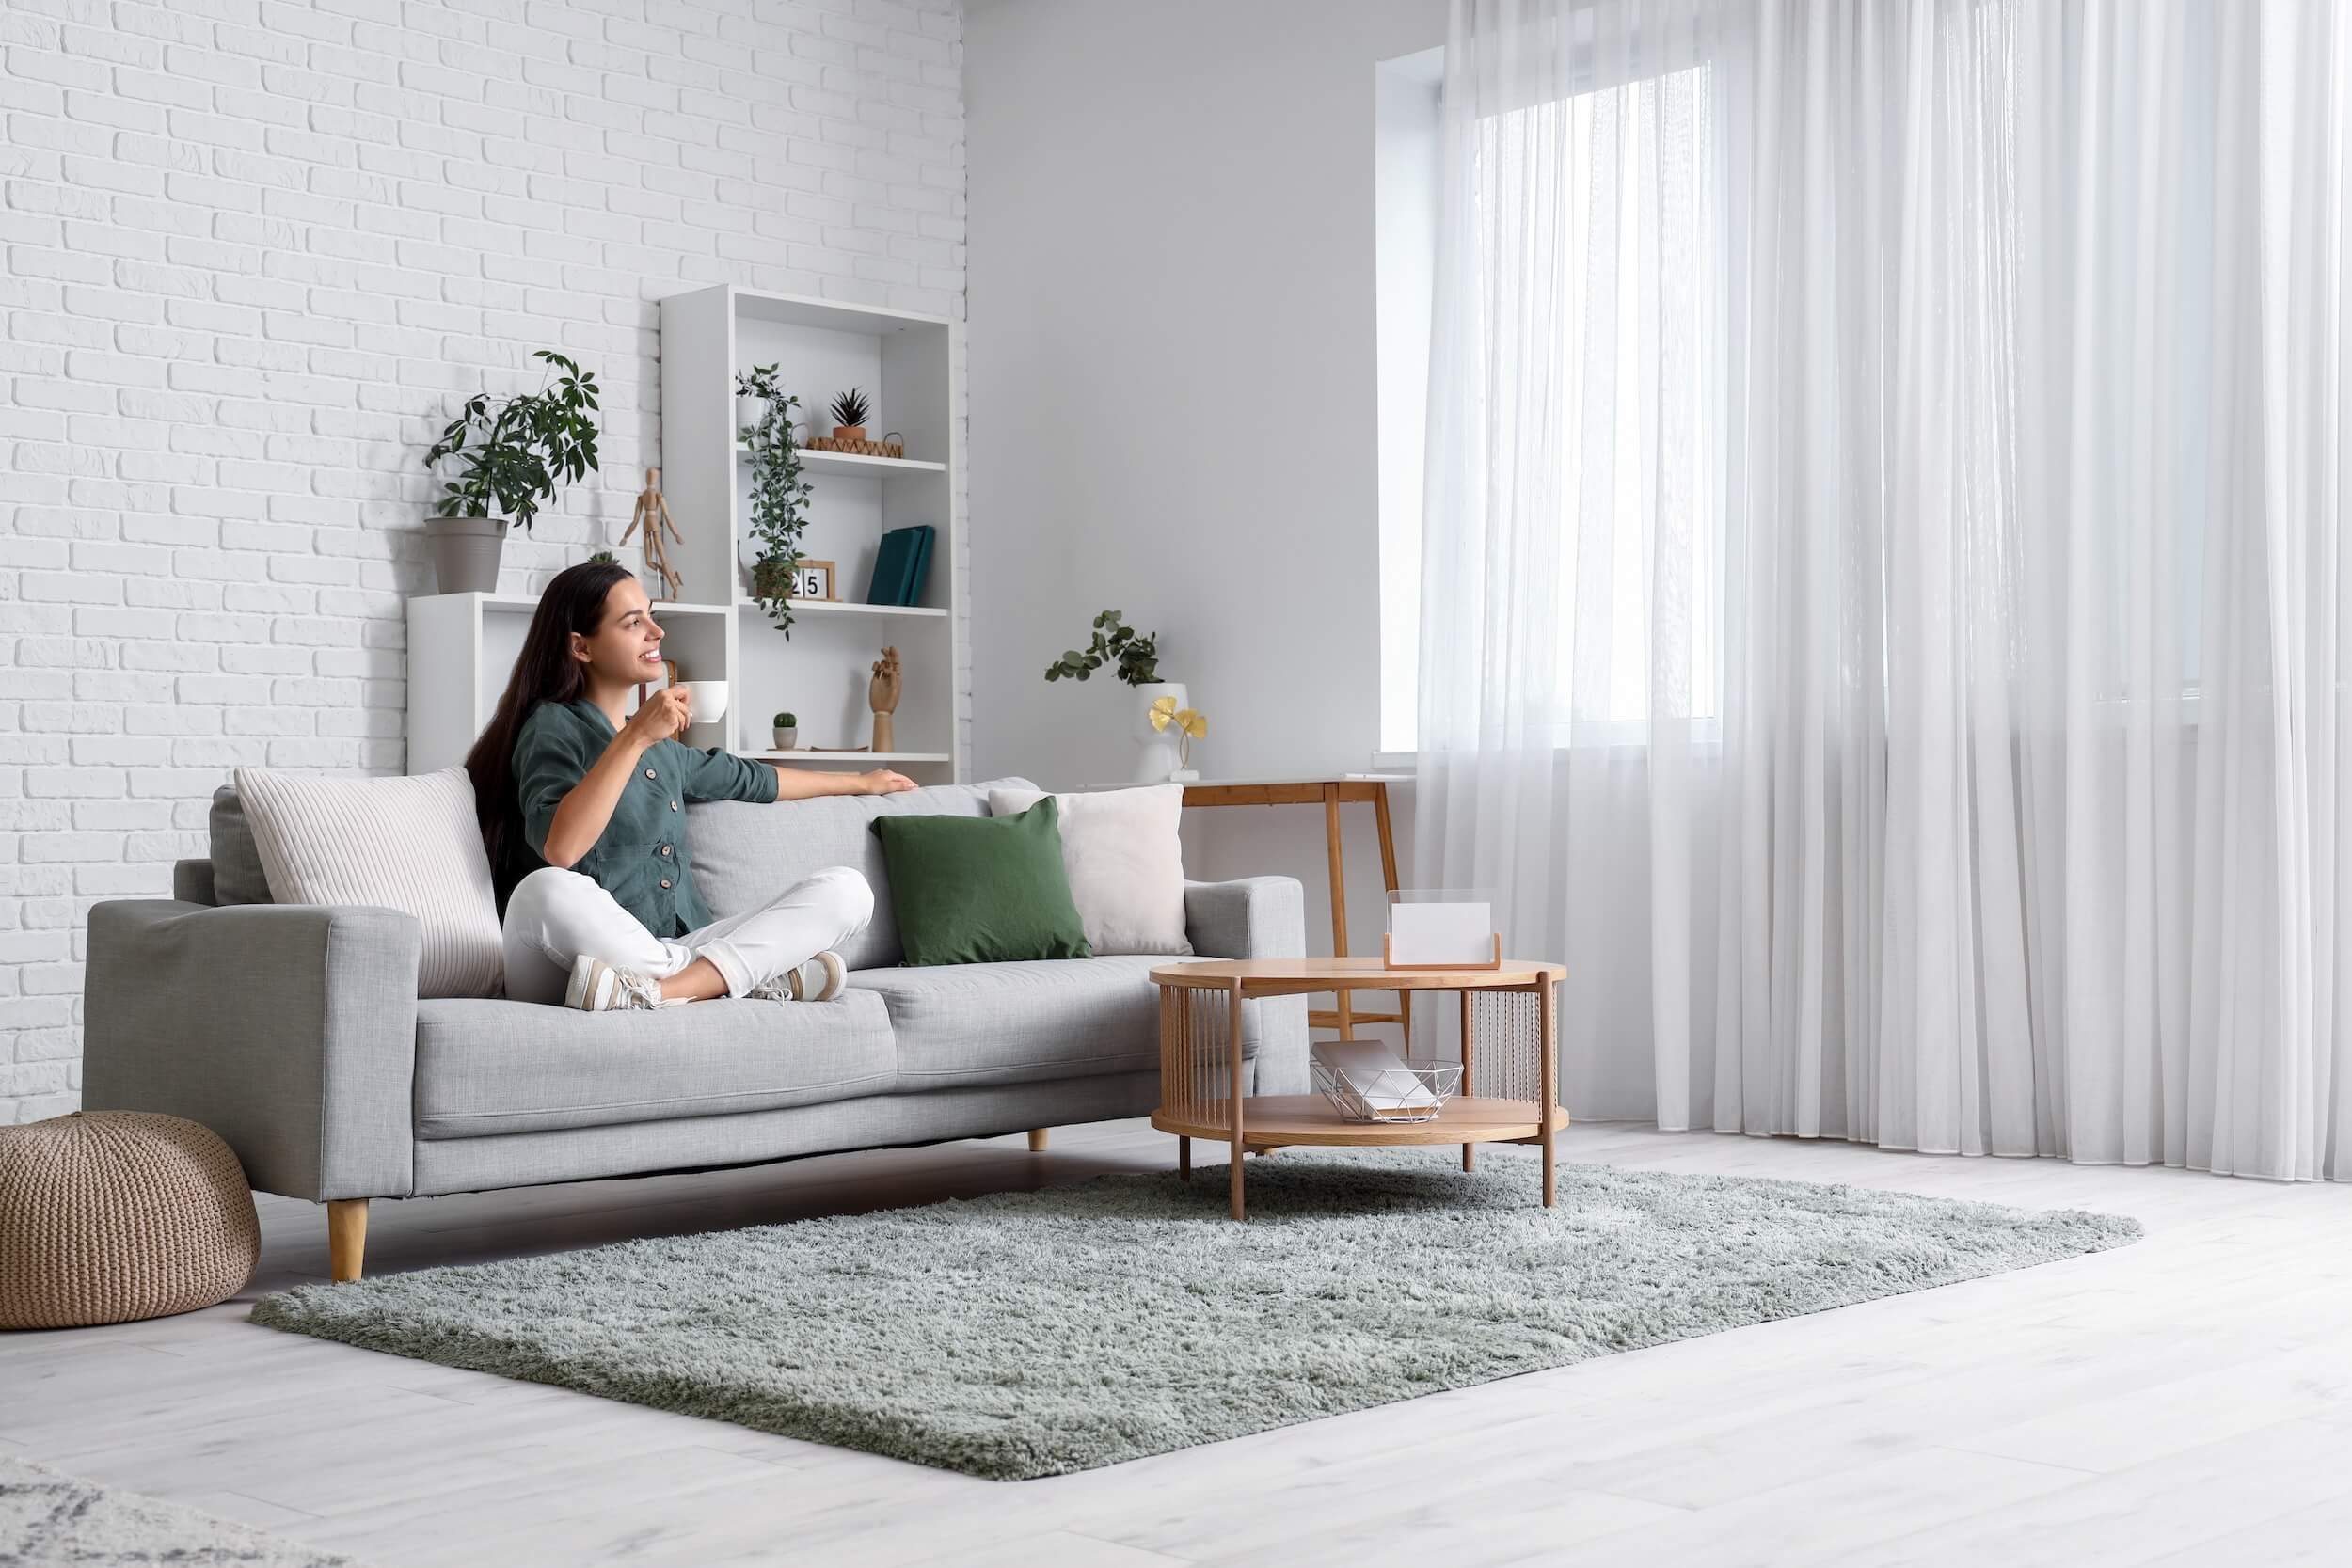 woman drinking coffee seated in white living room interior with natural light and various textures